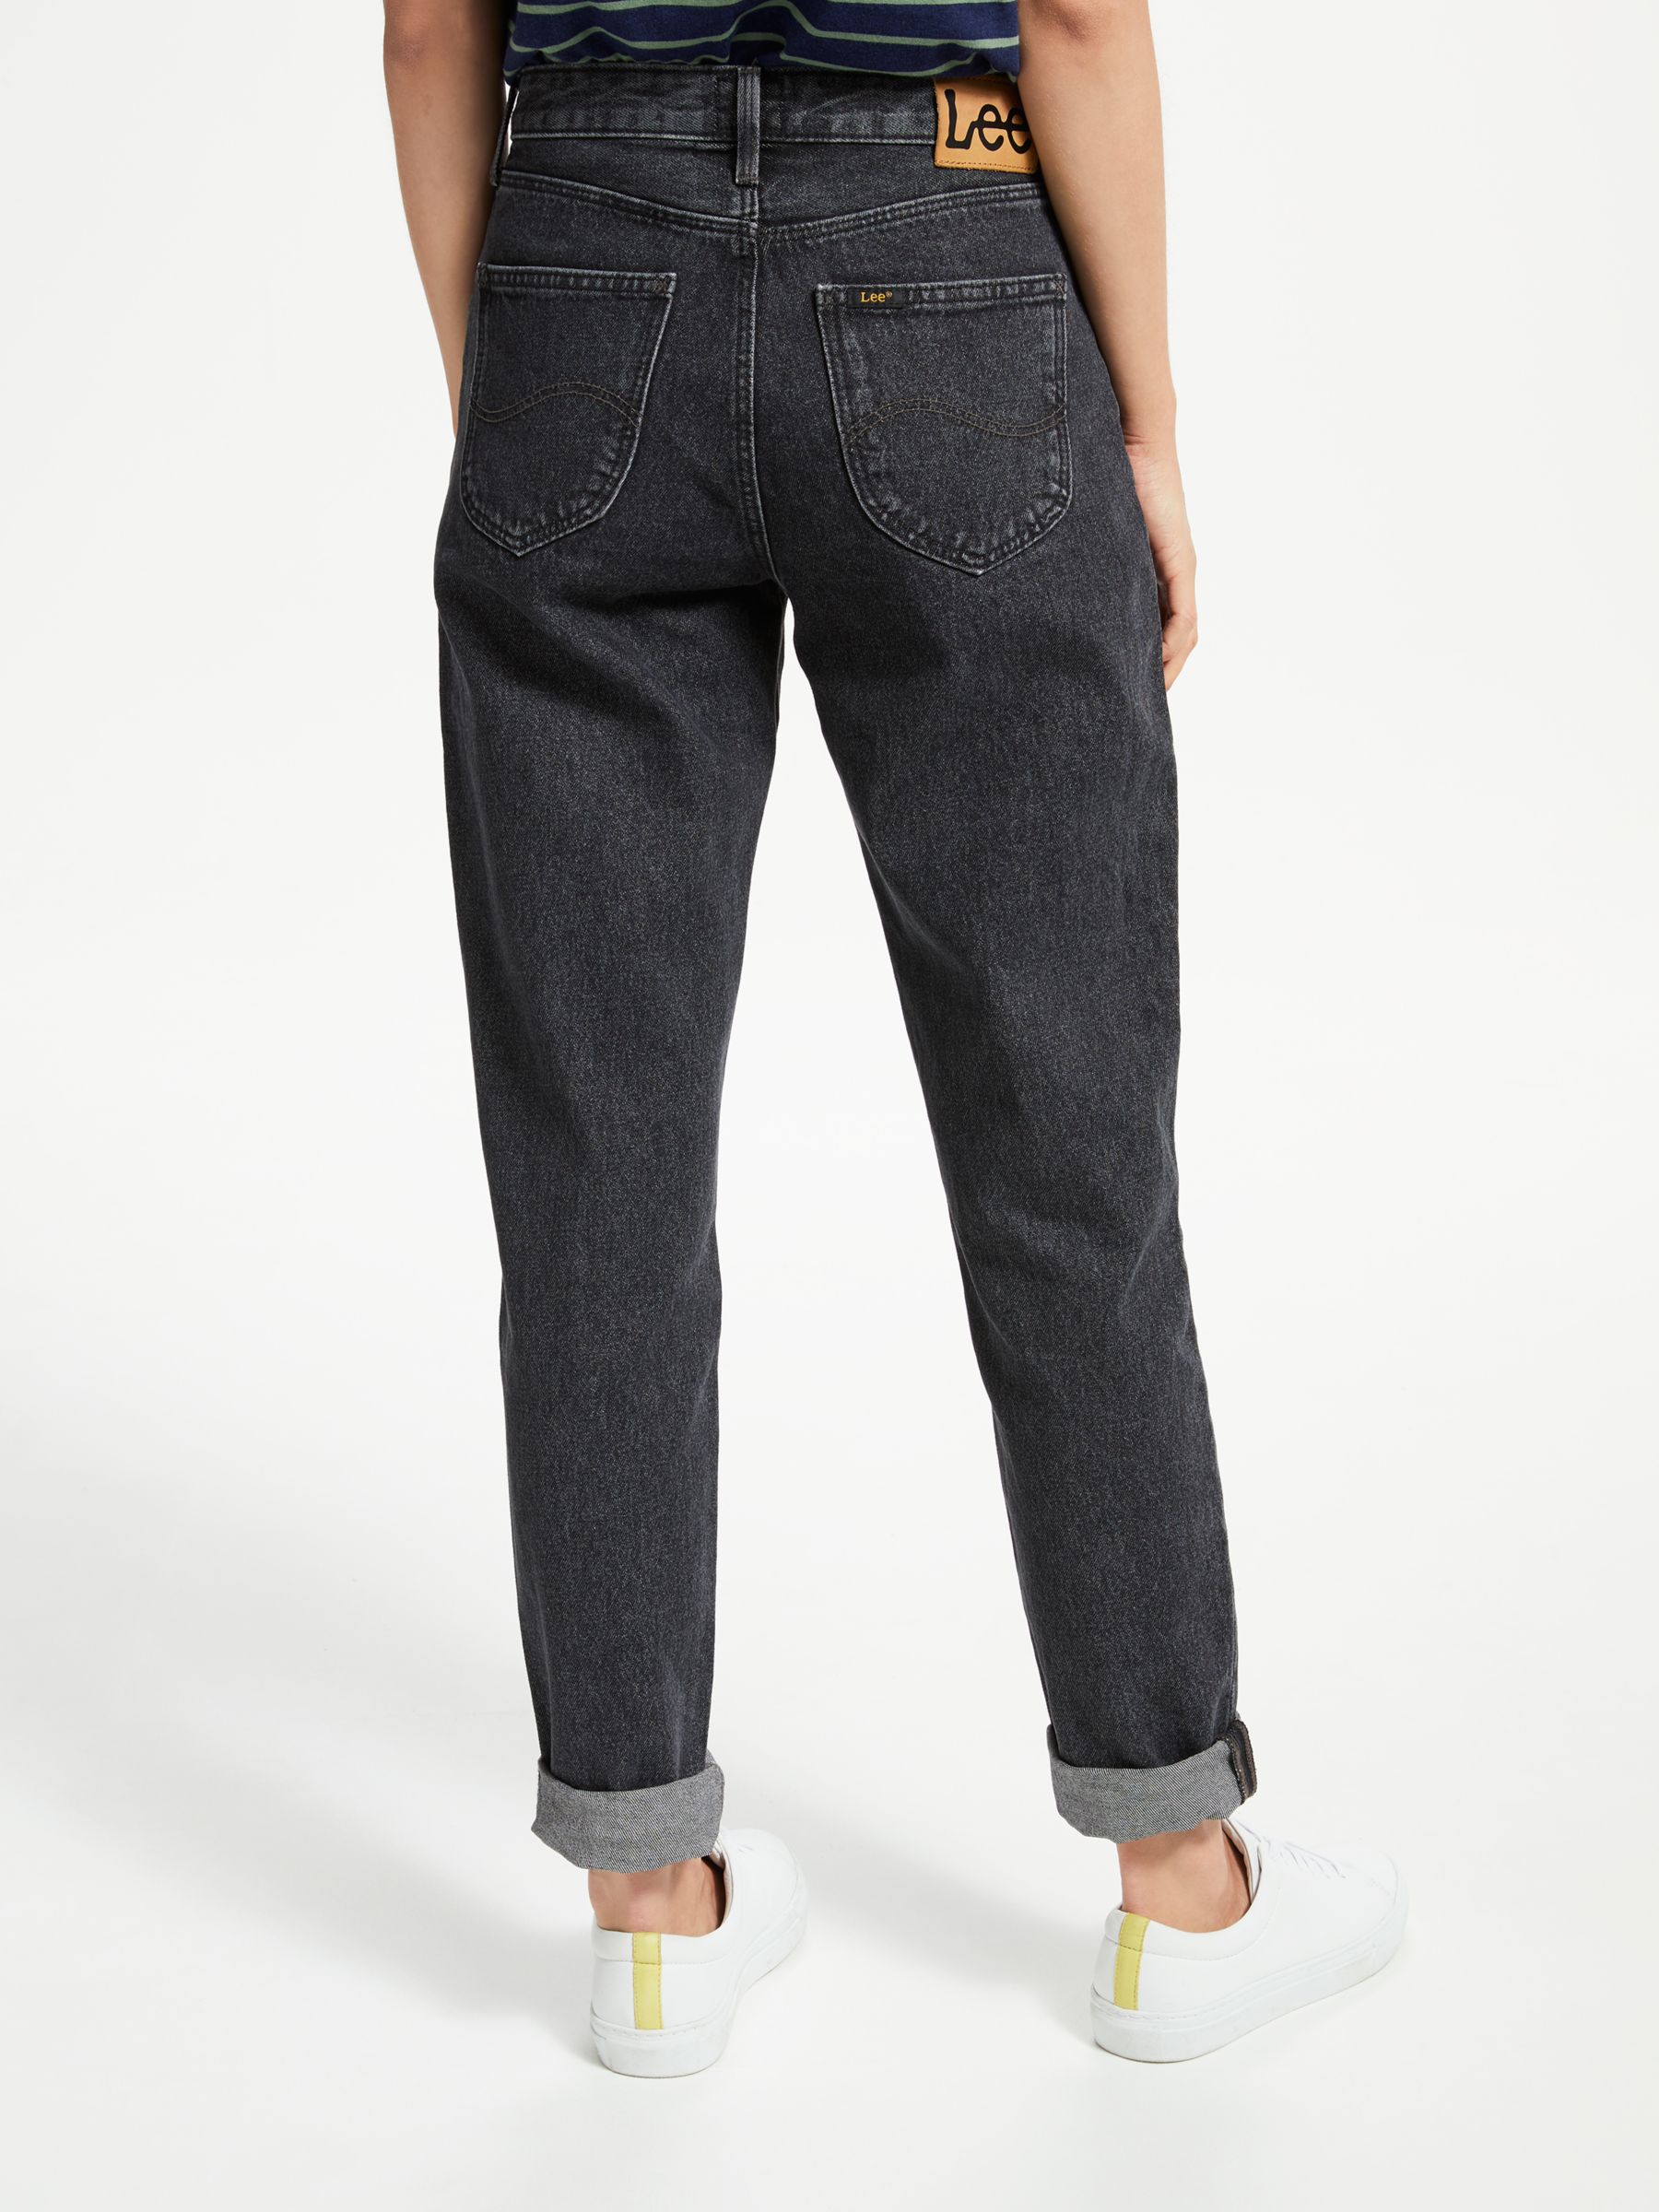 bedford cord jeans